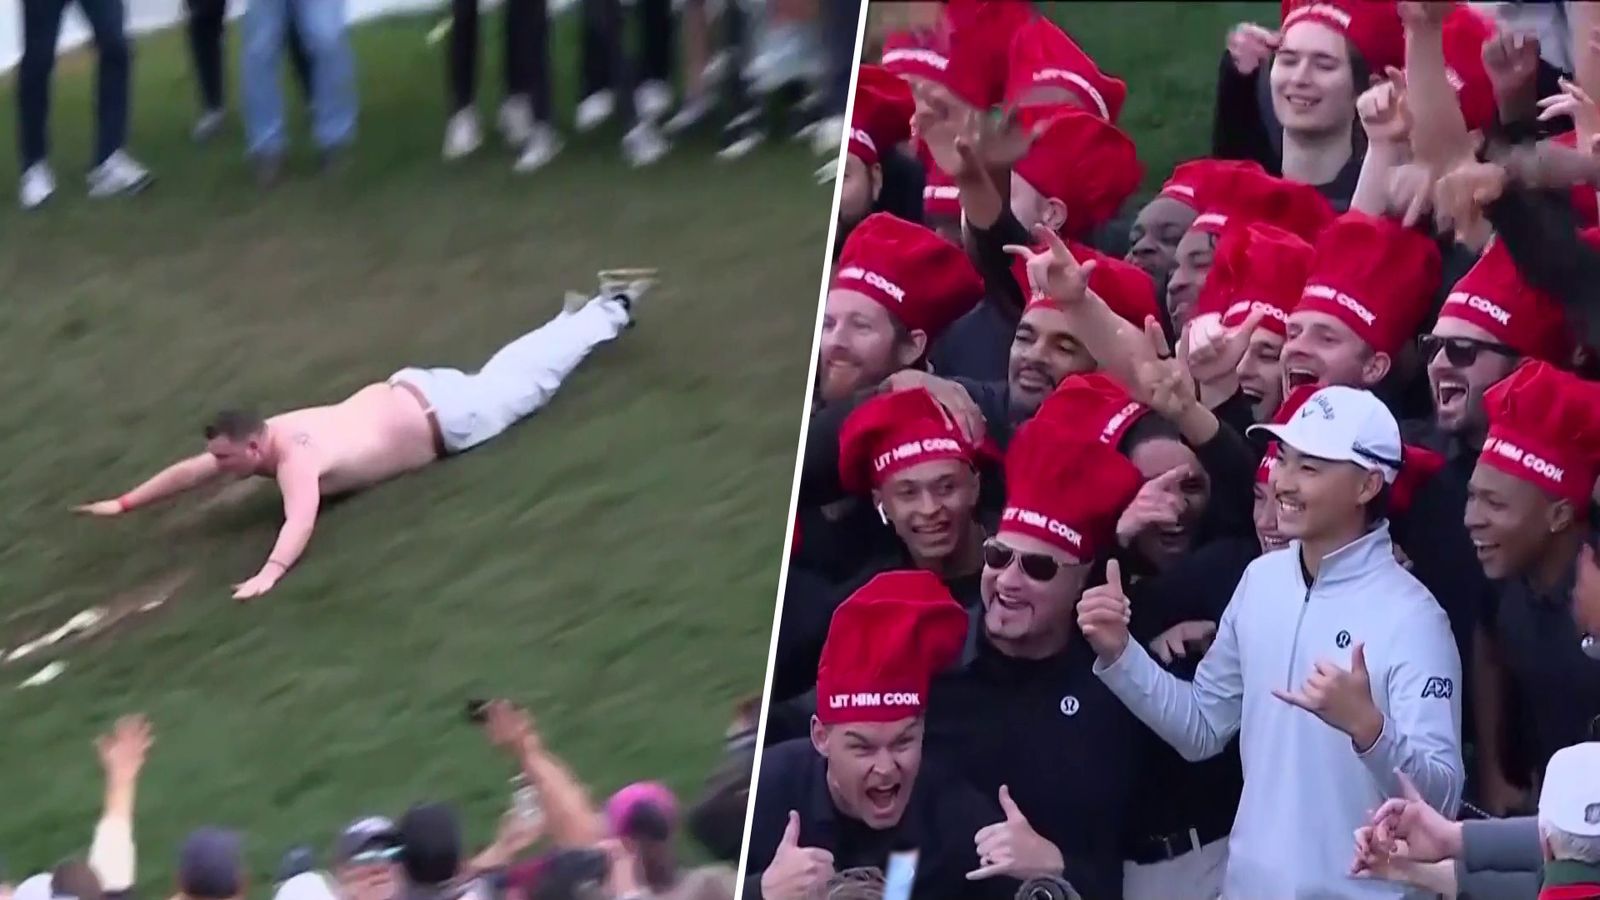 Phoenix Open Has the PGA Tour's party vibe gone too far after fan